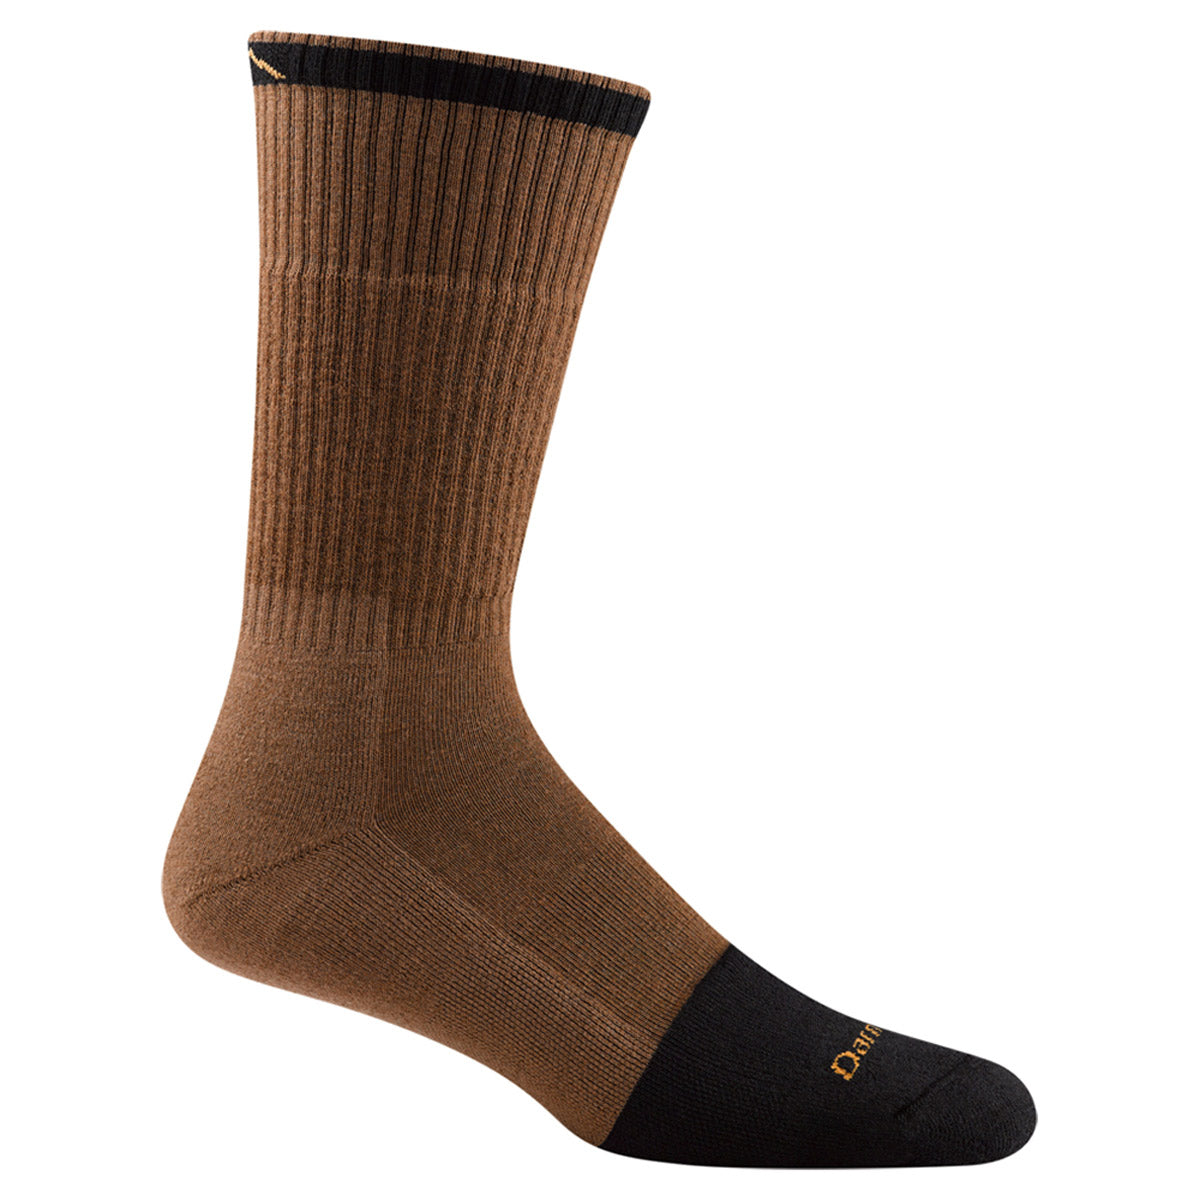 A single brown and black sock displayed against a white background. The sock has a ribbed upper and the word "Darn Tough" visible on the black toe section, offering full cushioning for all-day comfort.